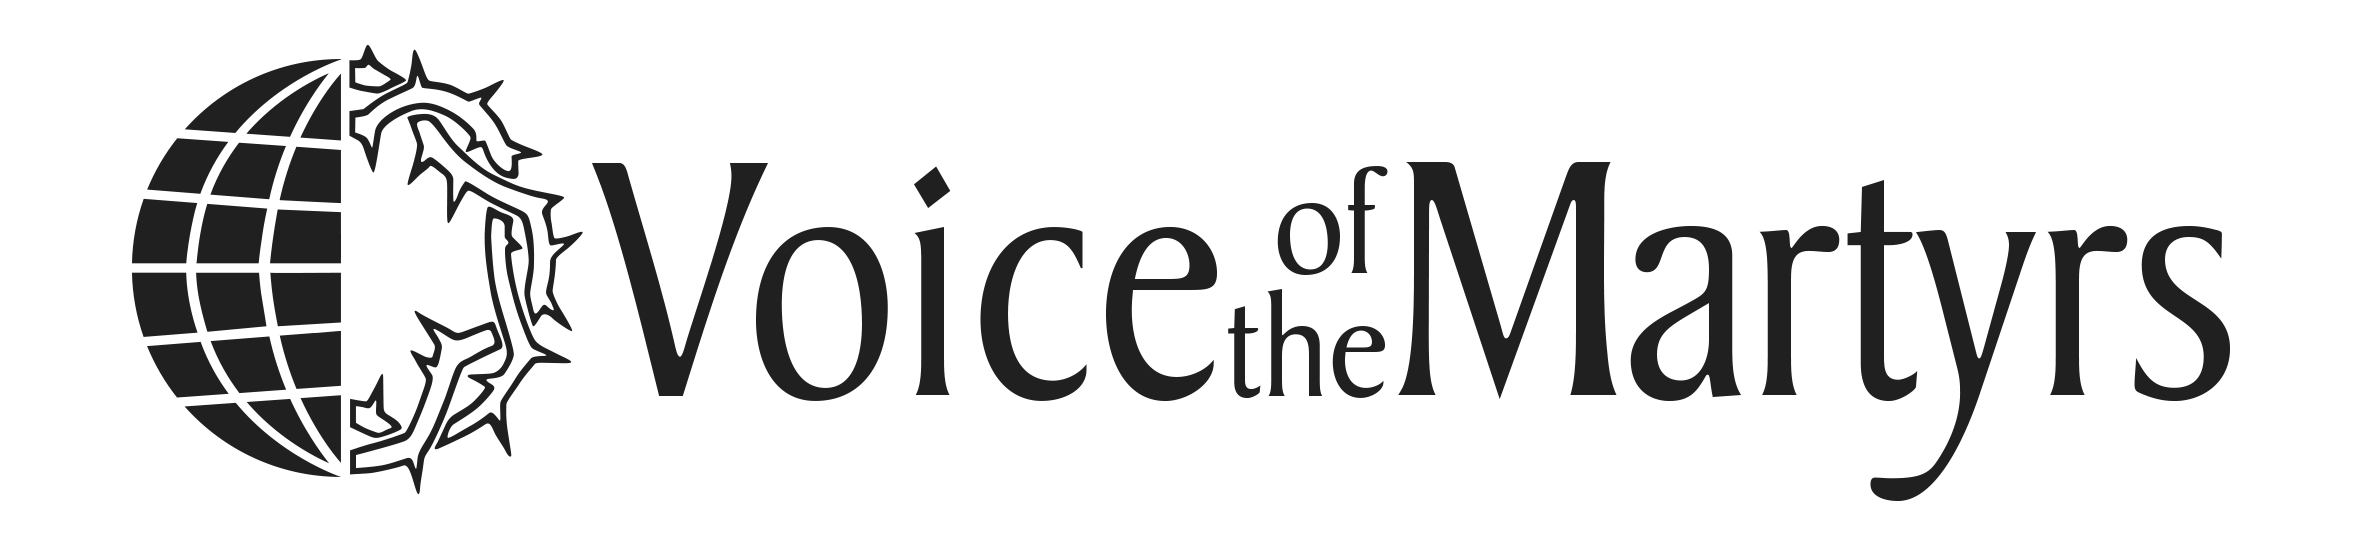 Voice of the Martyrs logo